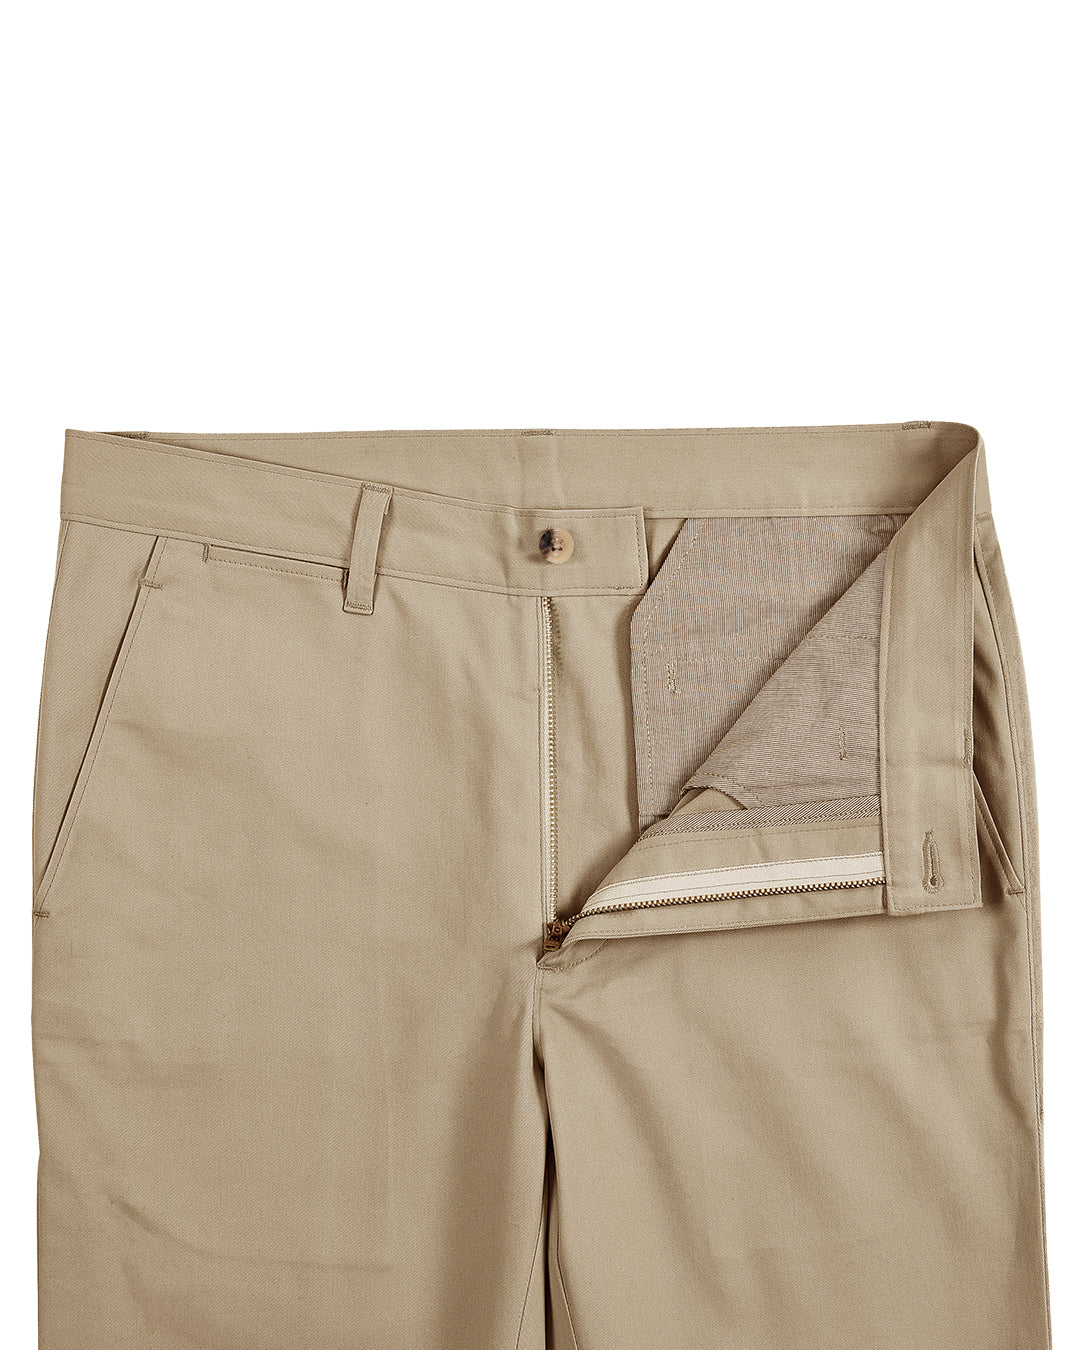 Front open view of custom Genoa Chino pants for men by Luxire in British khaki